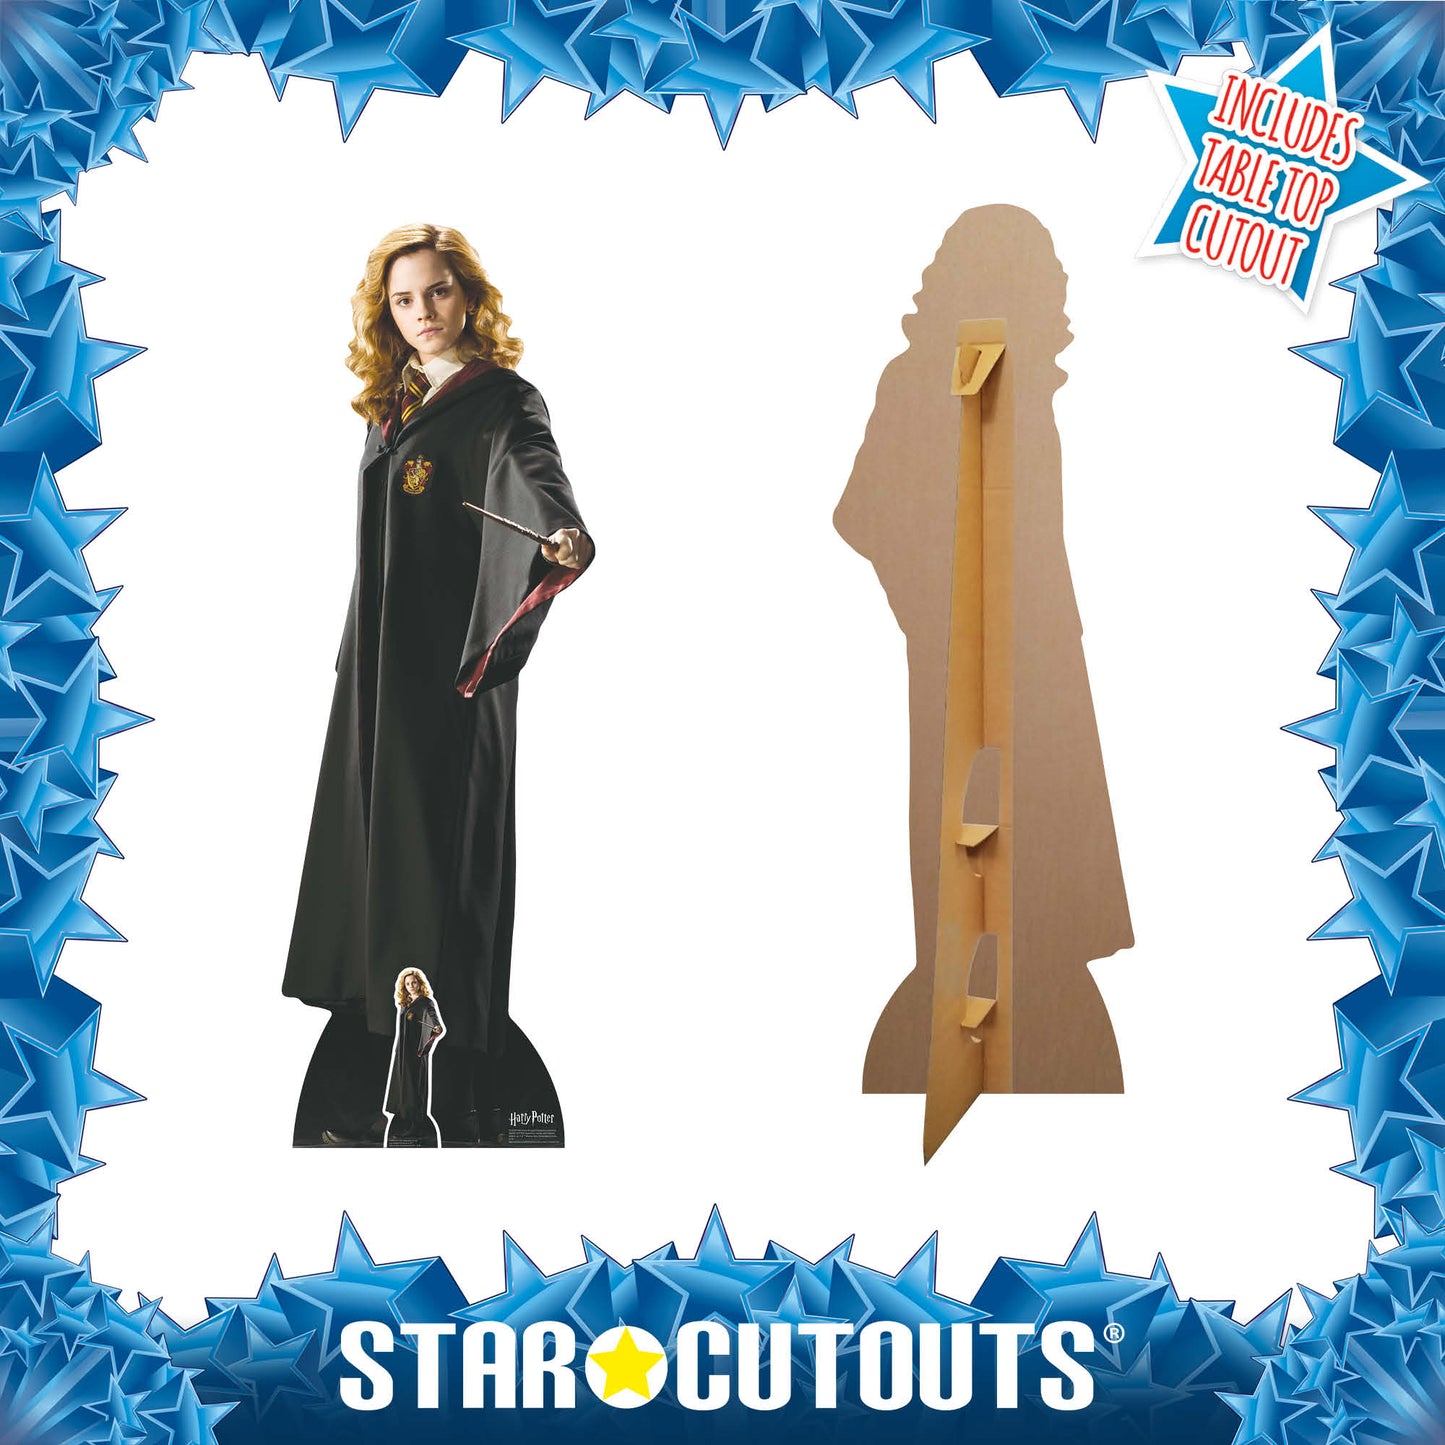 SC1087 Hermione Granger Hogwarts School of Witchcraft and Wizardry Uniform Cardboard Cut Out Height 163cm